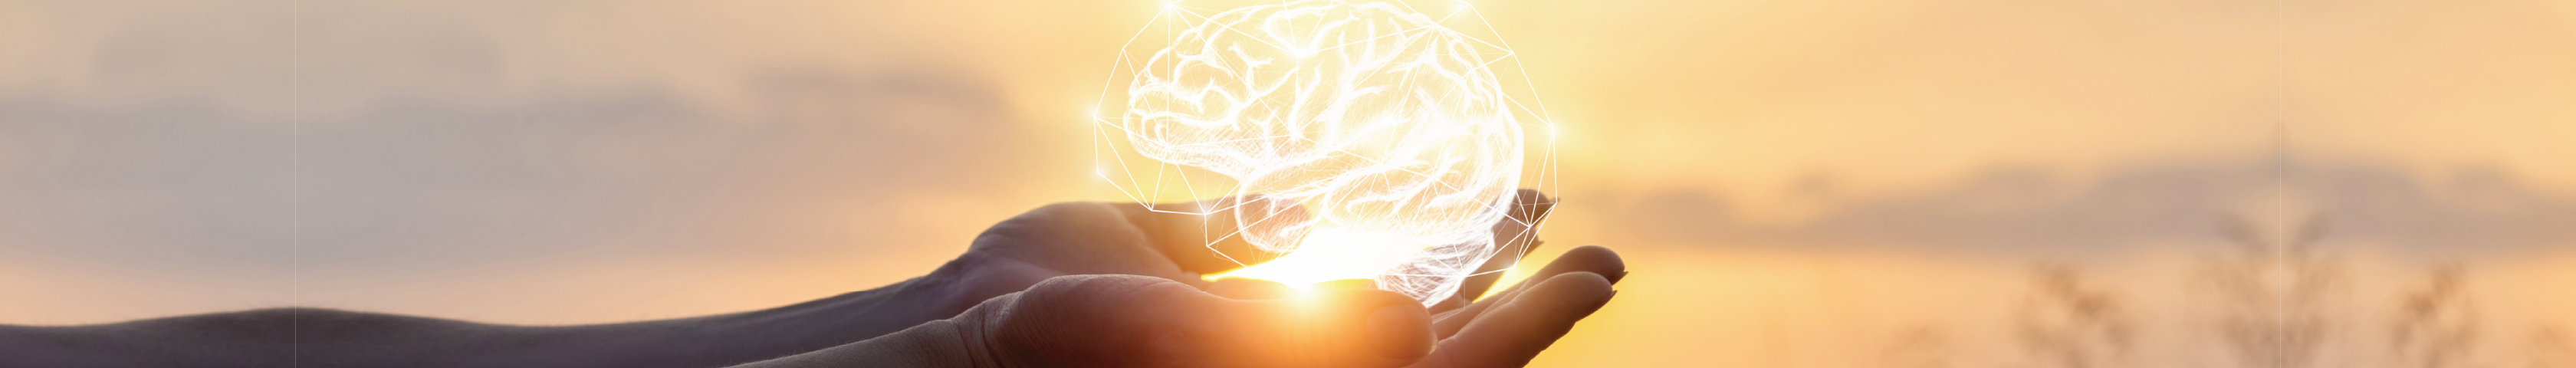 Hands extended holding a digitally embedded picture of a white human brain